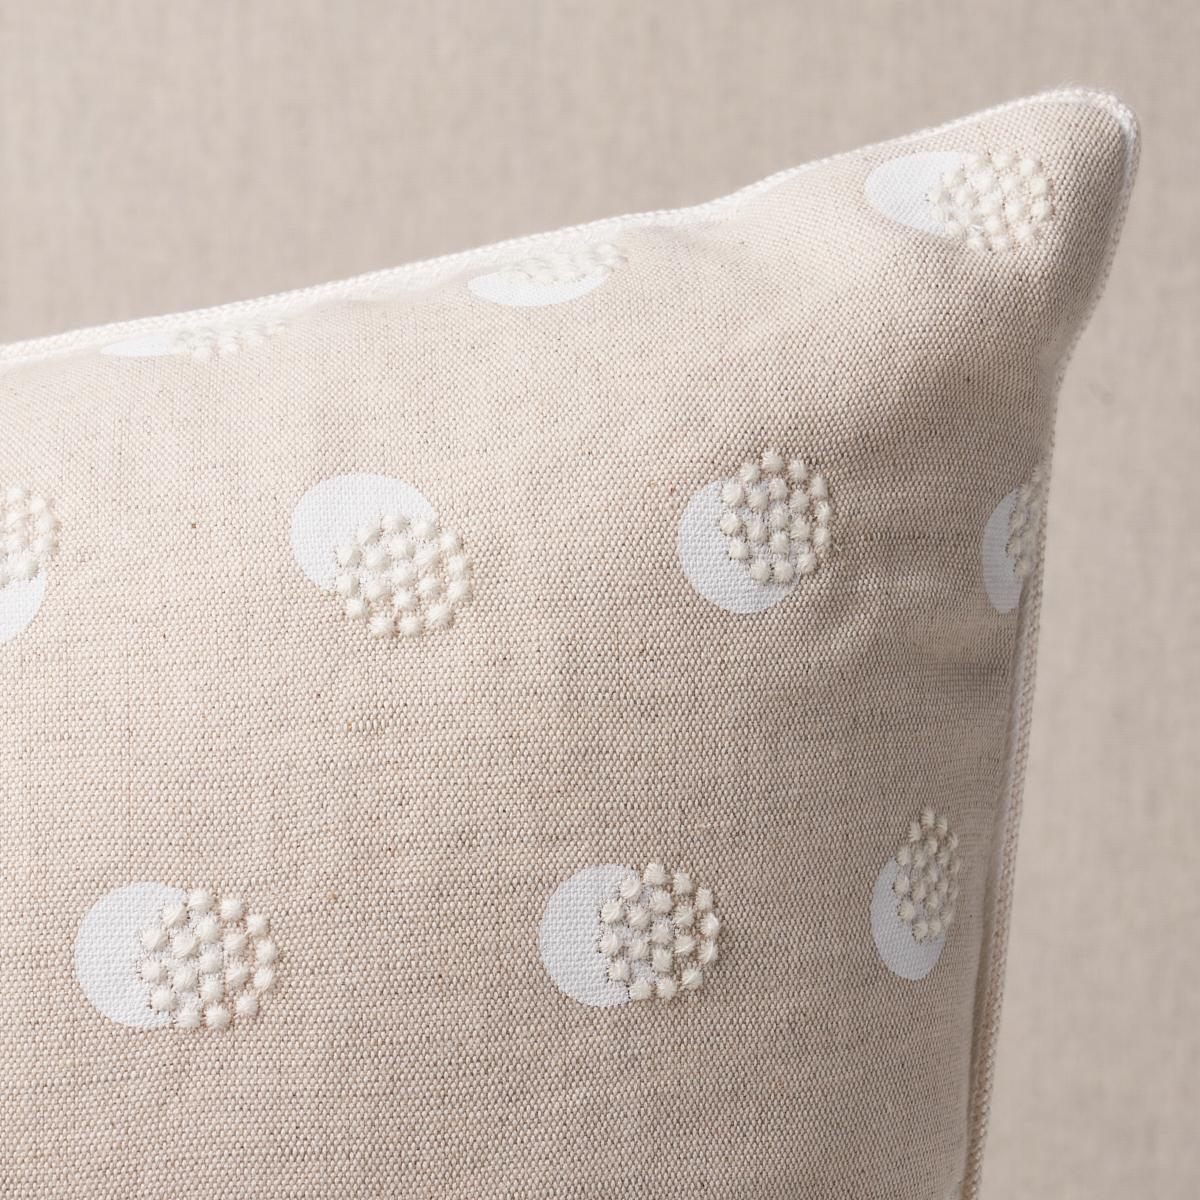 This pillow features Taylor Embroidery with a knife edge finish. Taylor Embroidery in ivory-on-natural artfully combines a few simple elements—bursts of offset French knots embroidered over a field of hand-screened dots—for a linen fabric that’s